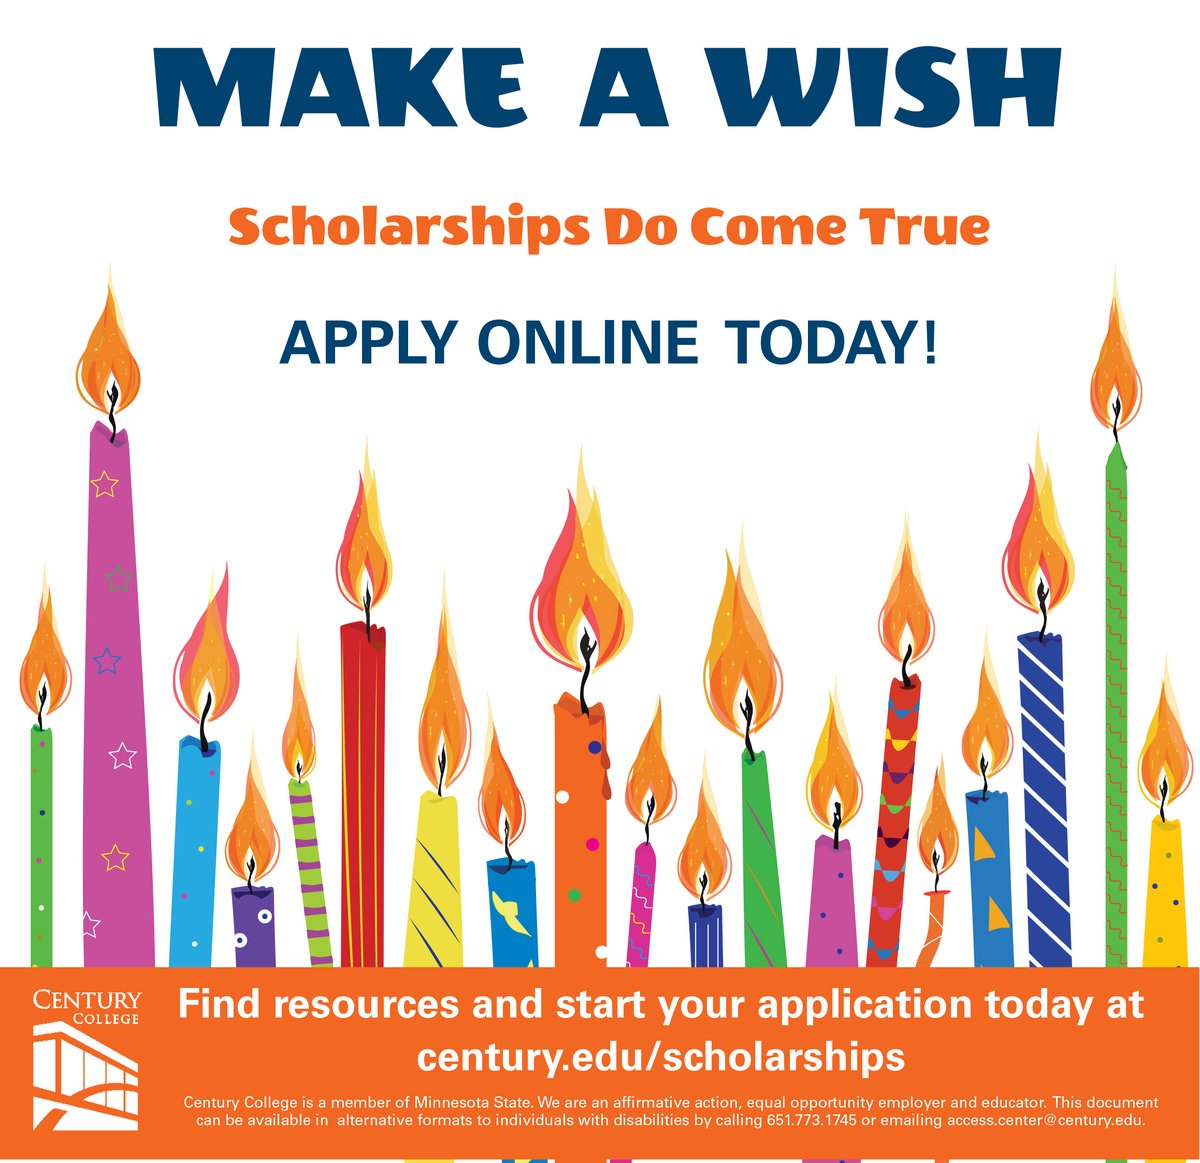 🎓 Attention future students of Century College! 💰 Over 100 scholarships are available annually, offering more than $300,000 in funding for your education. Apply now for round two of the 2024-2025 scholarships! 🌐 #CenturyCollege #Scholarships